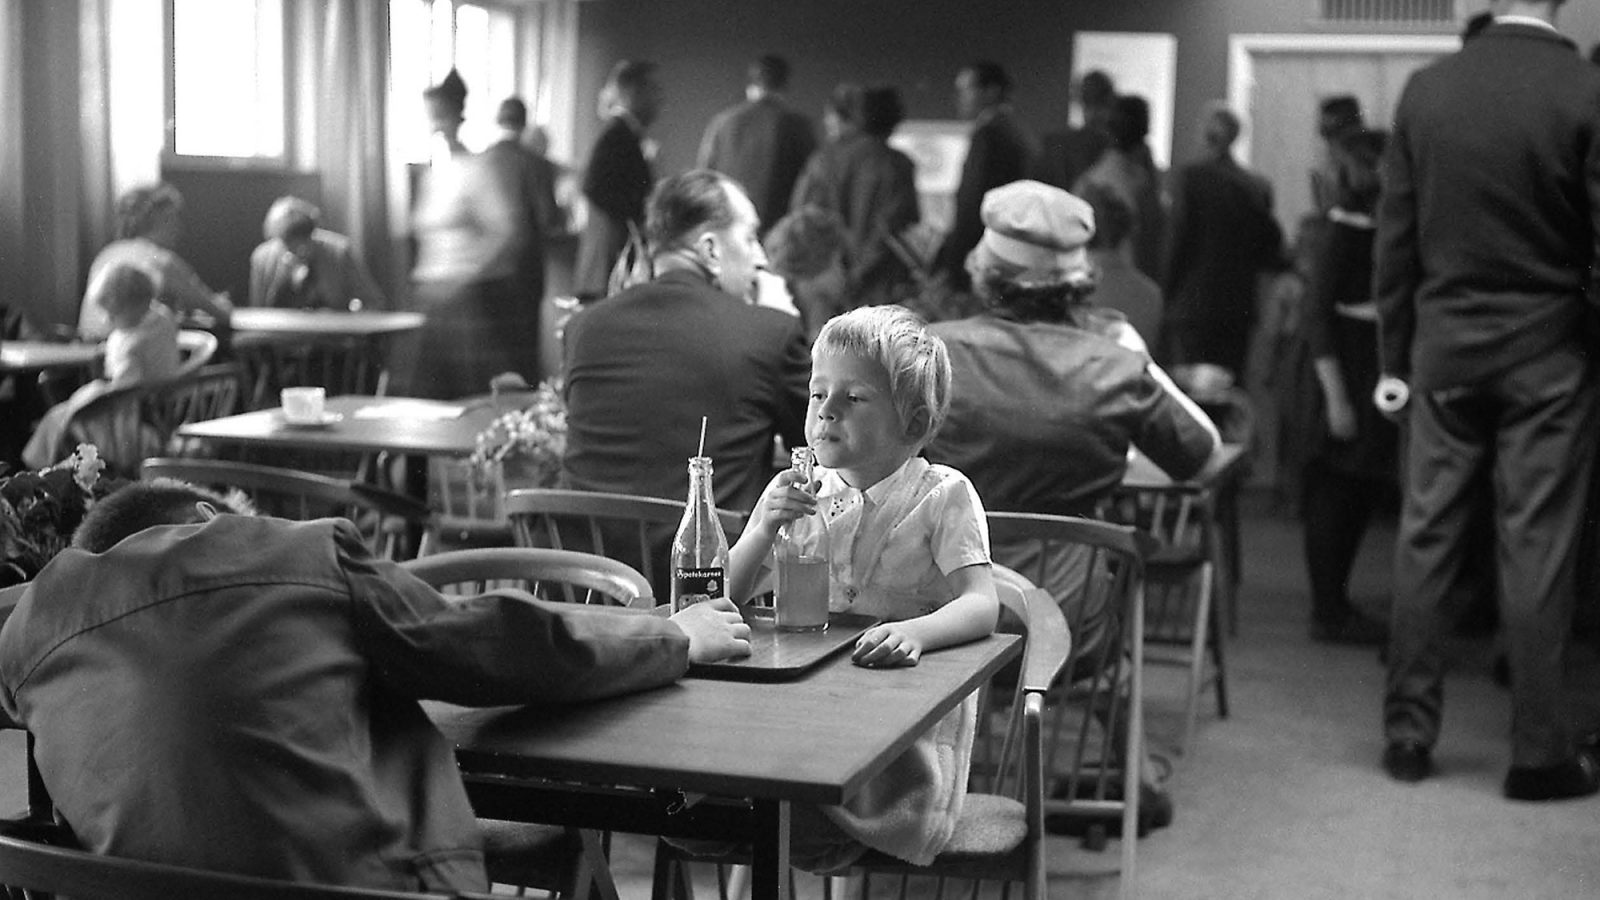 Child drinks soda from glass bottle with straw in a crowded restaurant with 1960s wood furnishings.